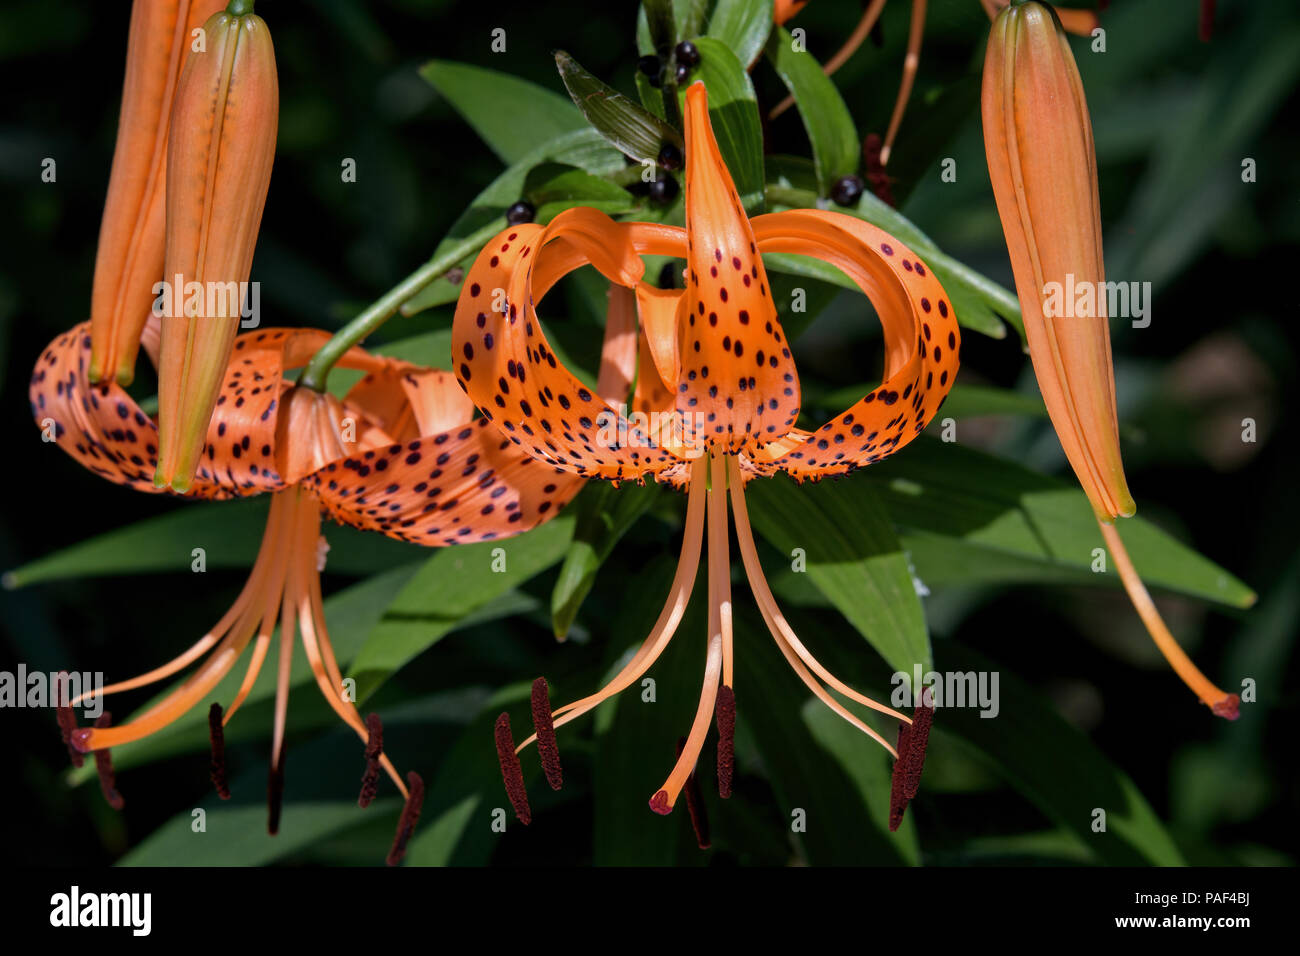 The Tiger Lily or Lilium lancifolium in the early morning sun. It bears large fiery orange flowers covered by spots. Stock Photo